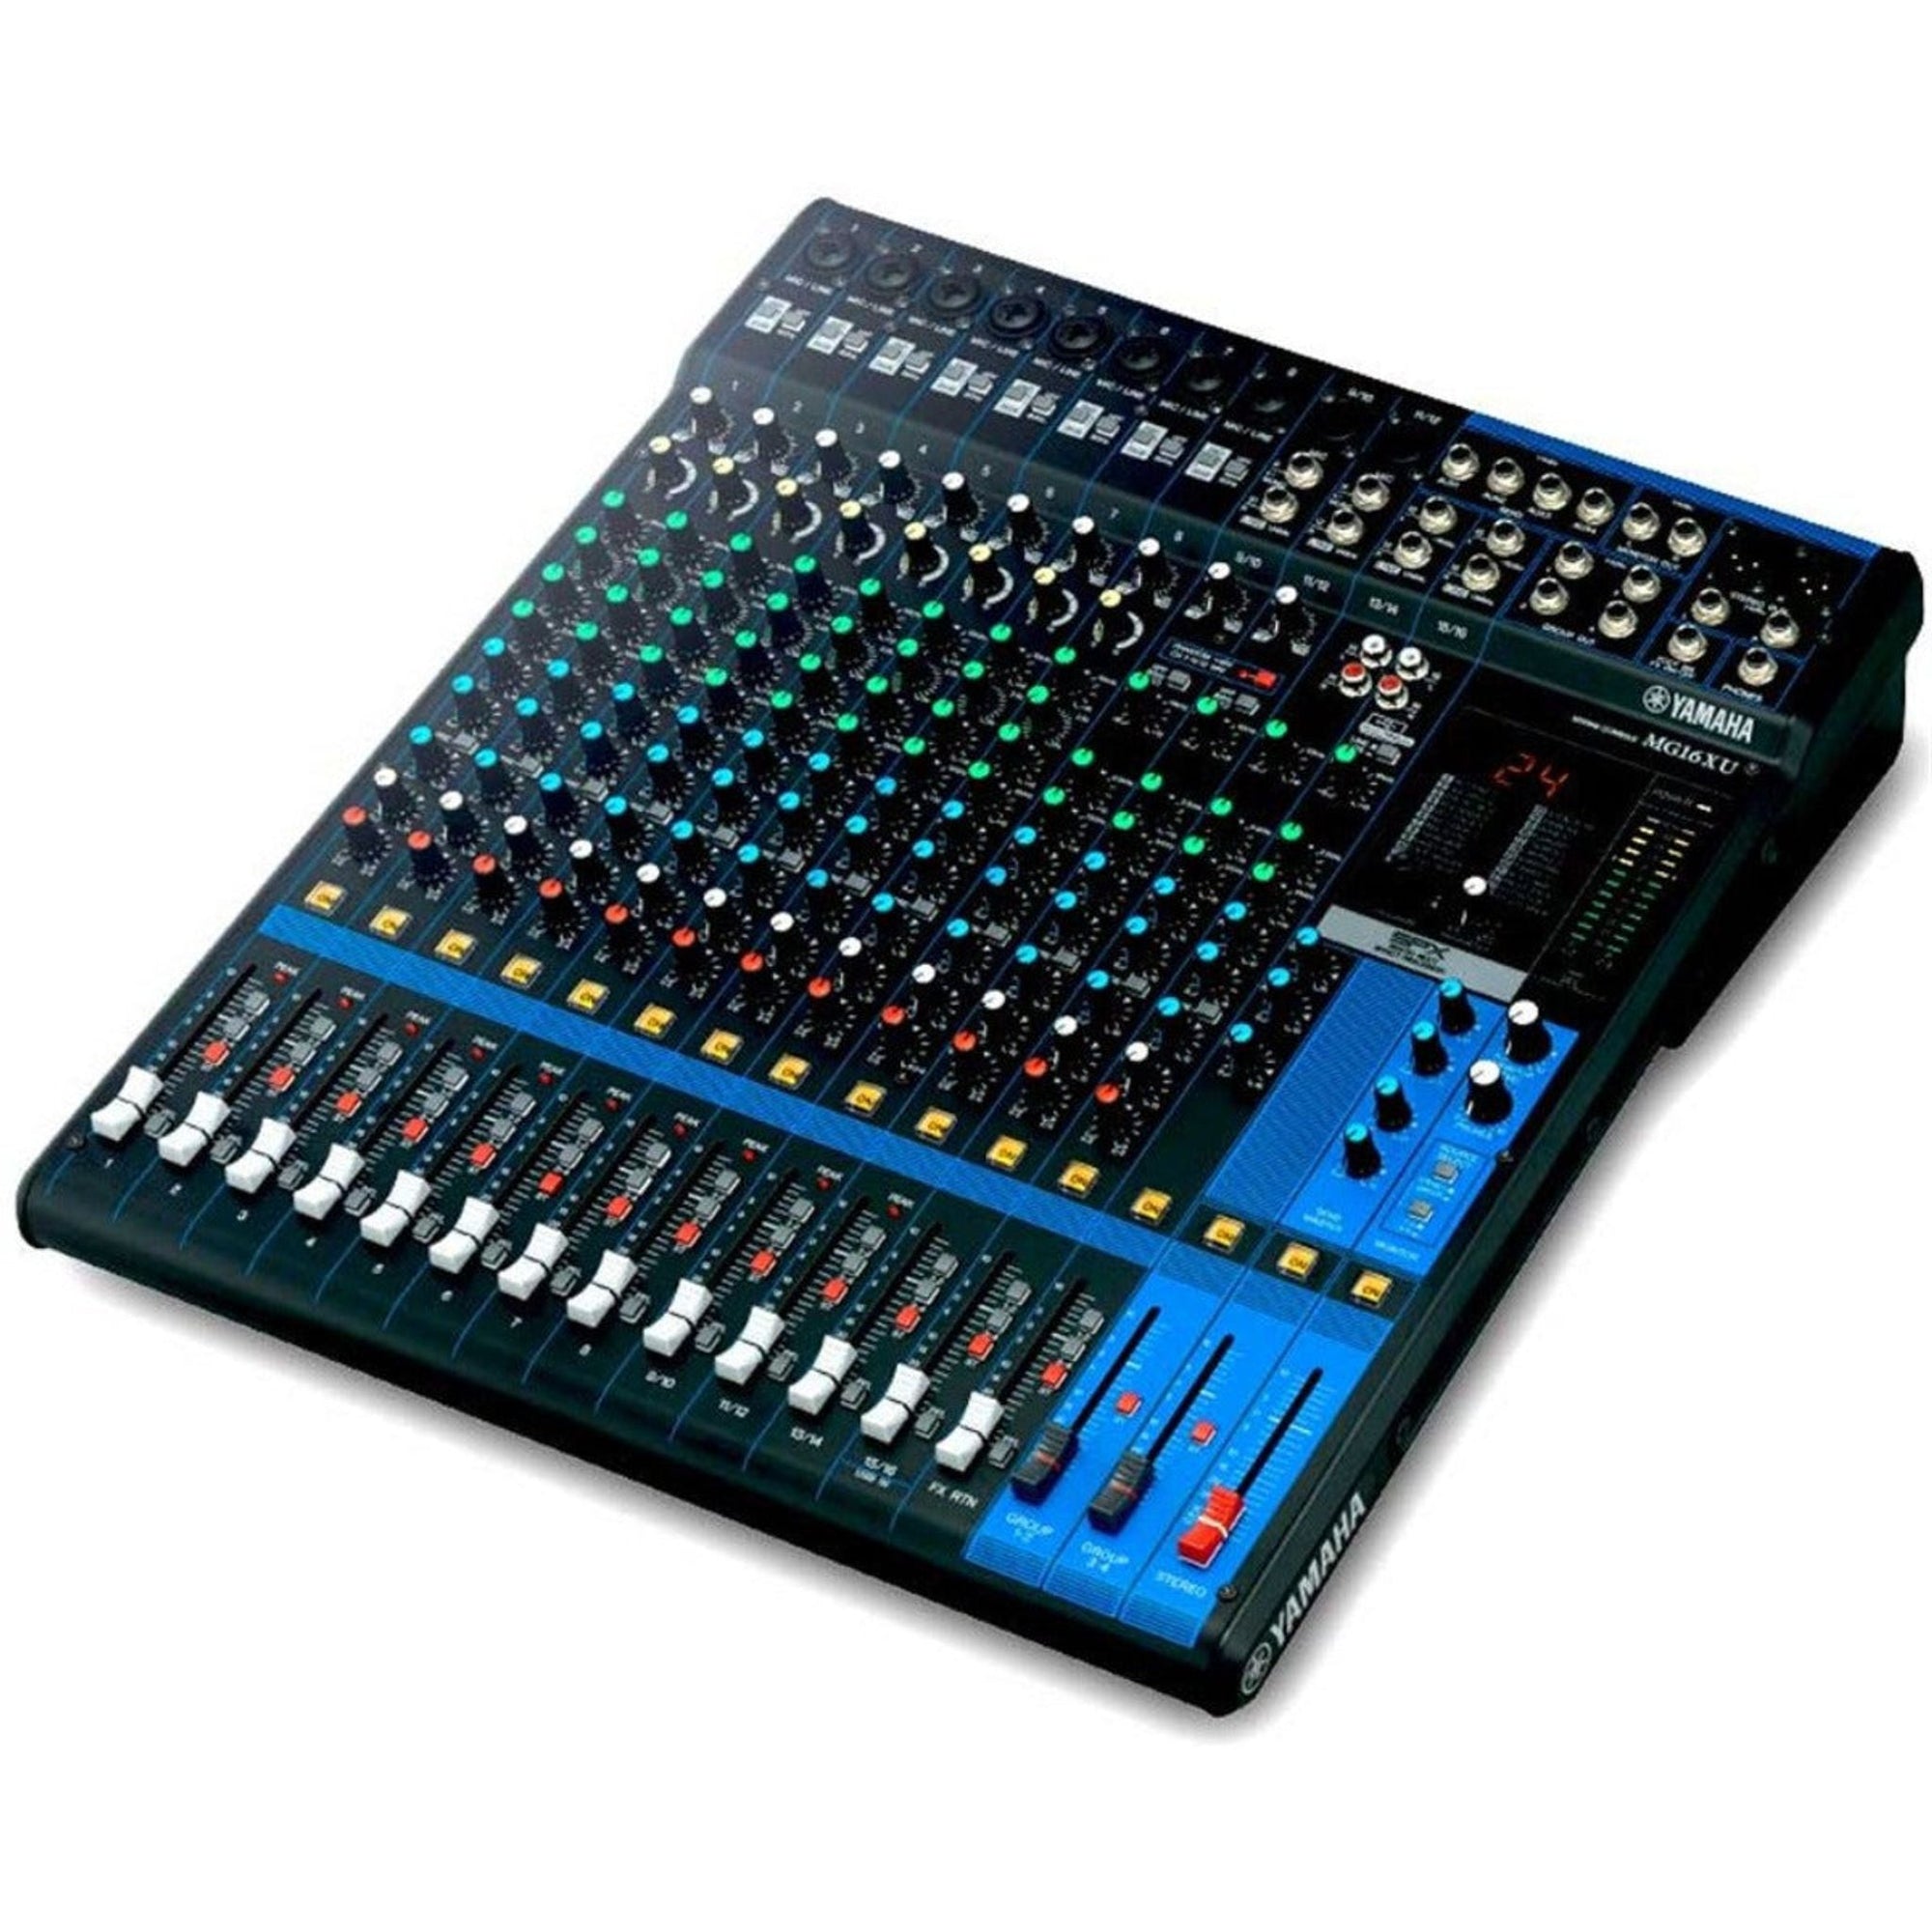 The MG16XU from Yamaha is a compact mixer capable of sixteen simultaneous inputs that is ideal for performances, recordings lectures and more.